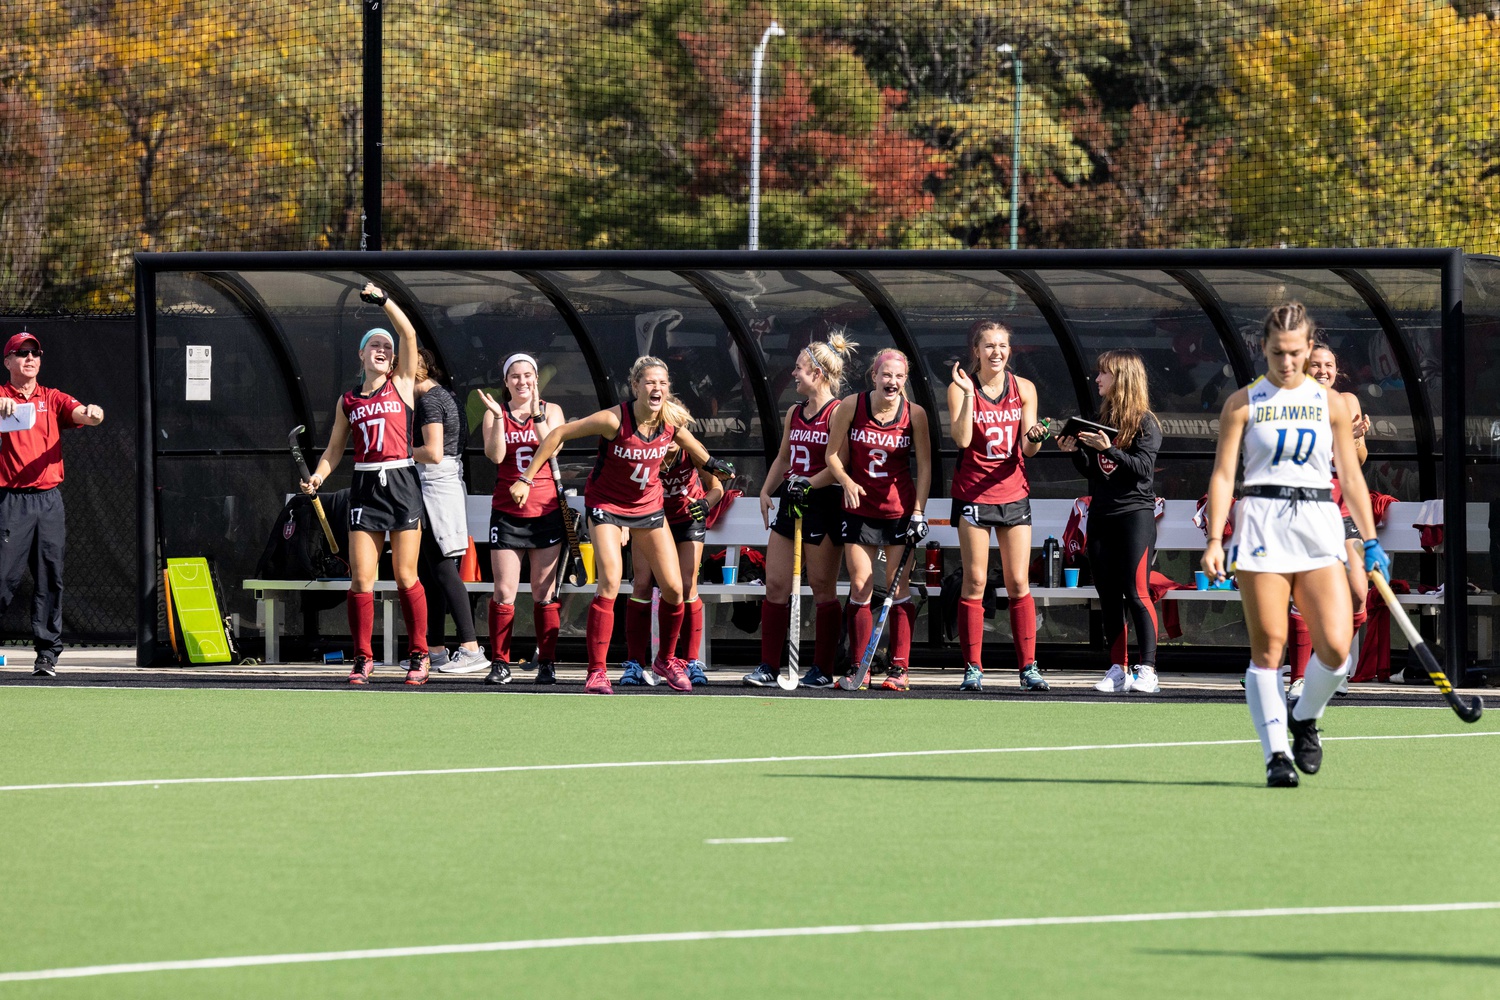 The Harvard field hockey bench celebrates against Delaware at home on October 16, 2022.